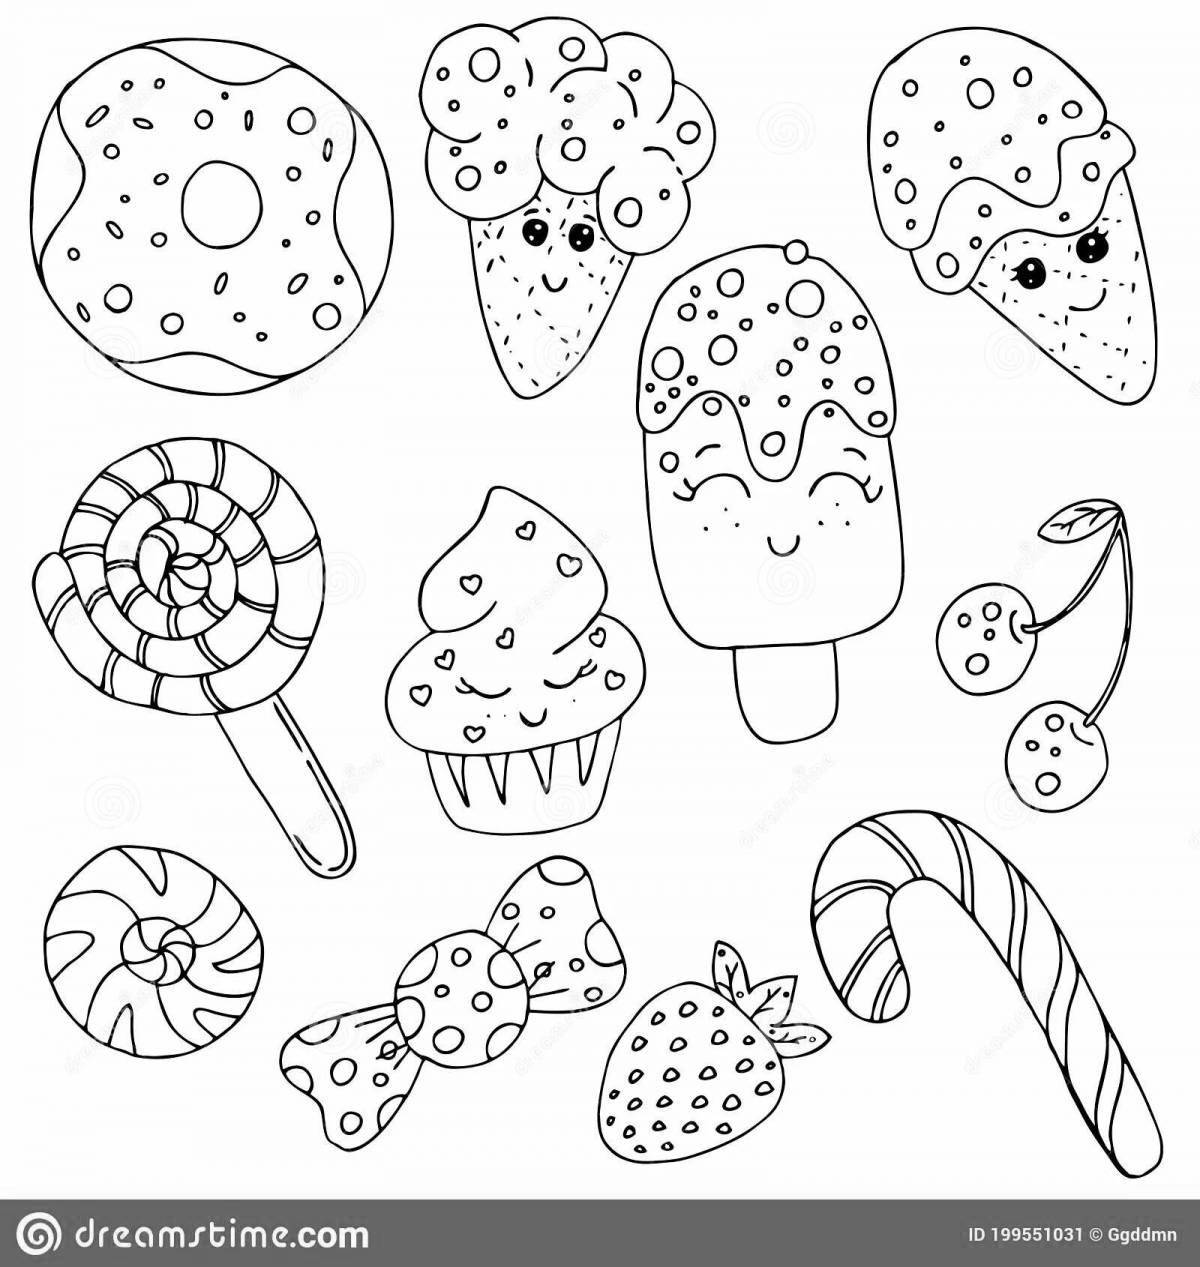 Coloring page appetizing donuts